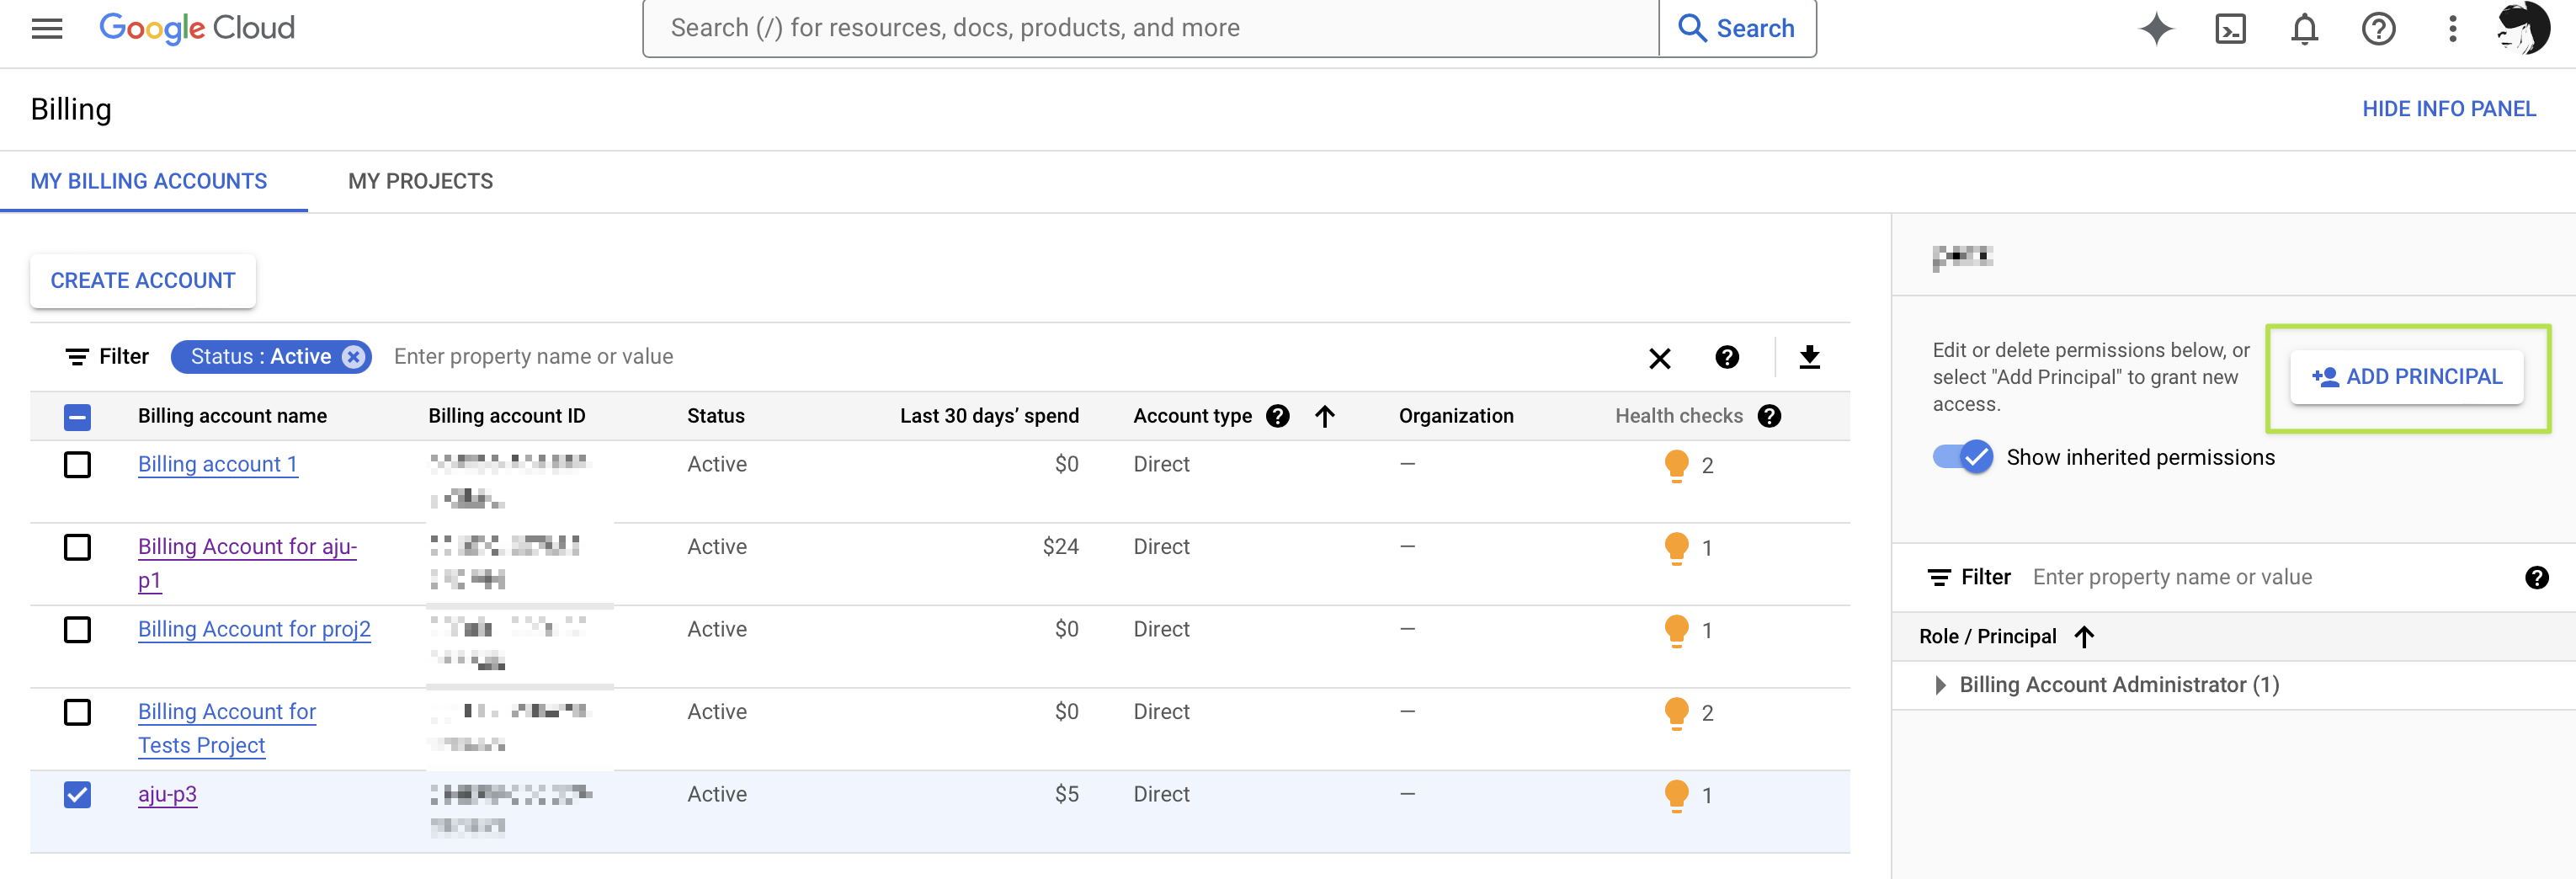 Screenshot of billing accounts management page in Google Cloud console with info panel opened, highlighting 'Add principal' button.